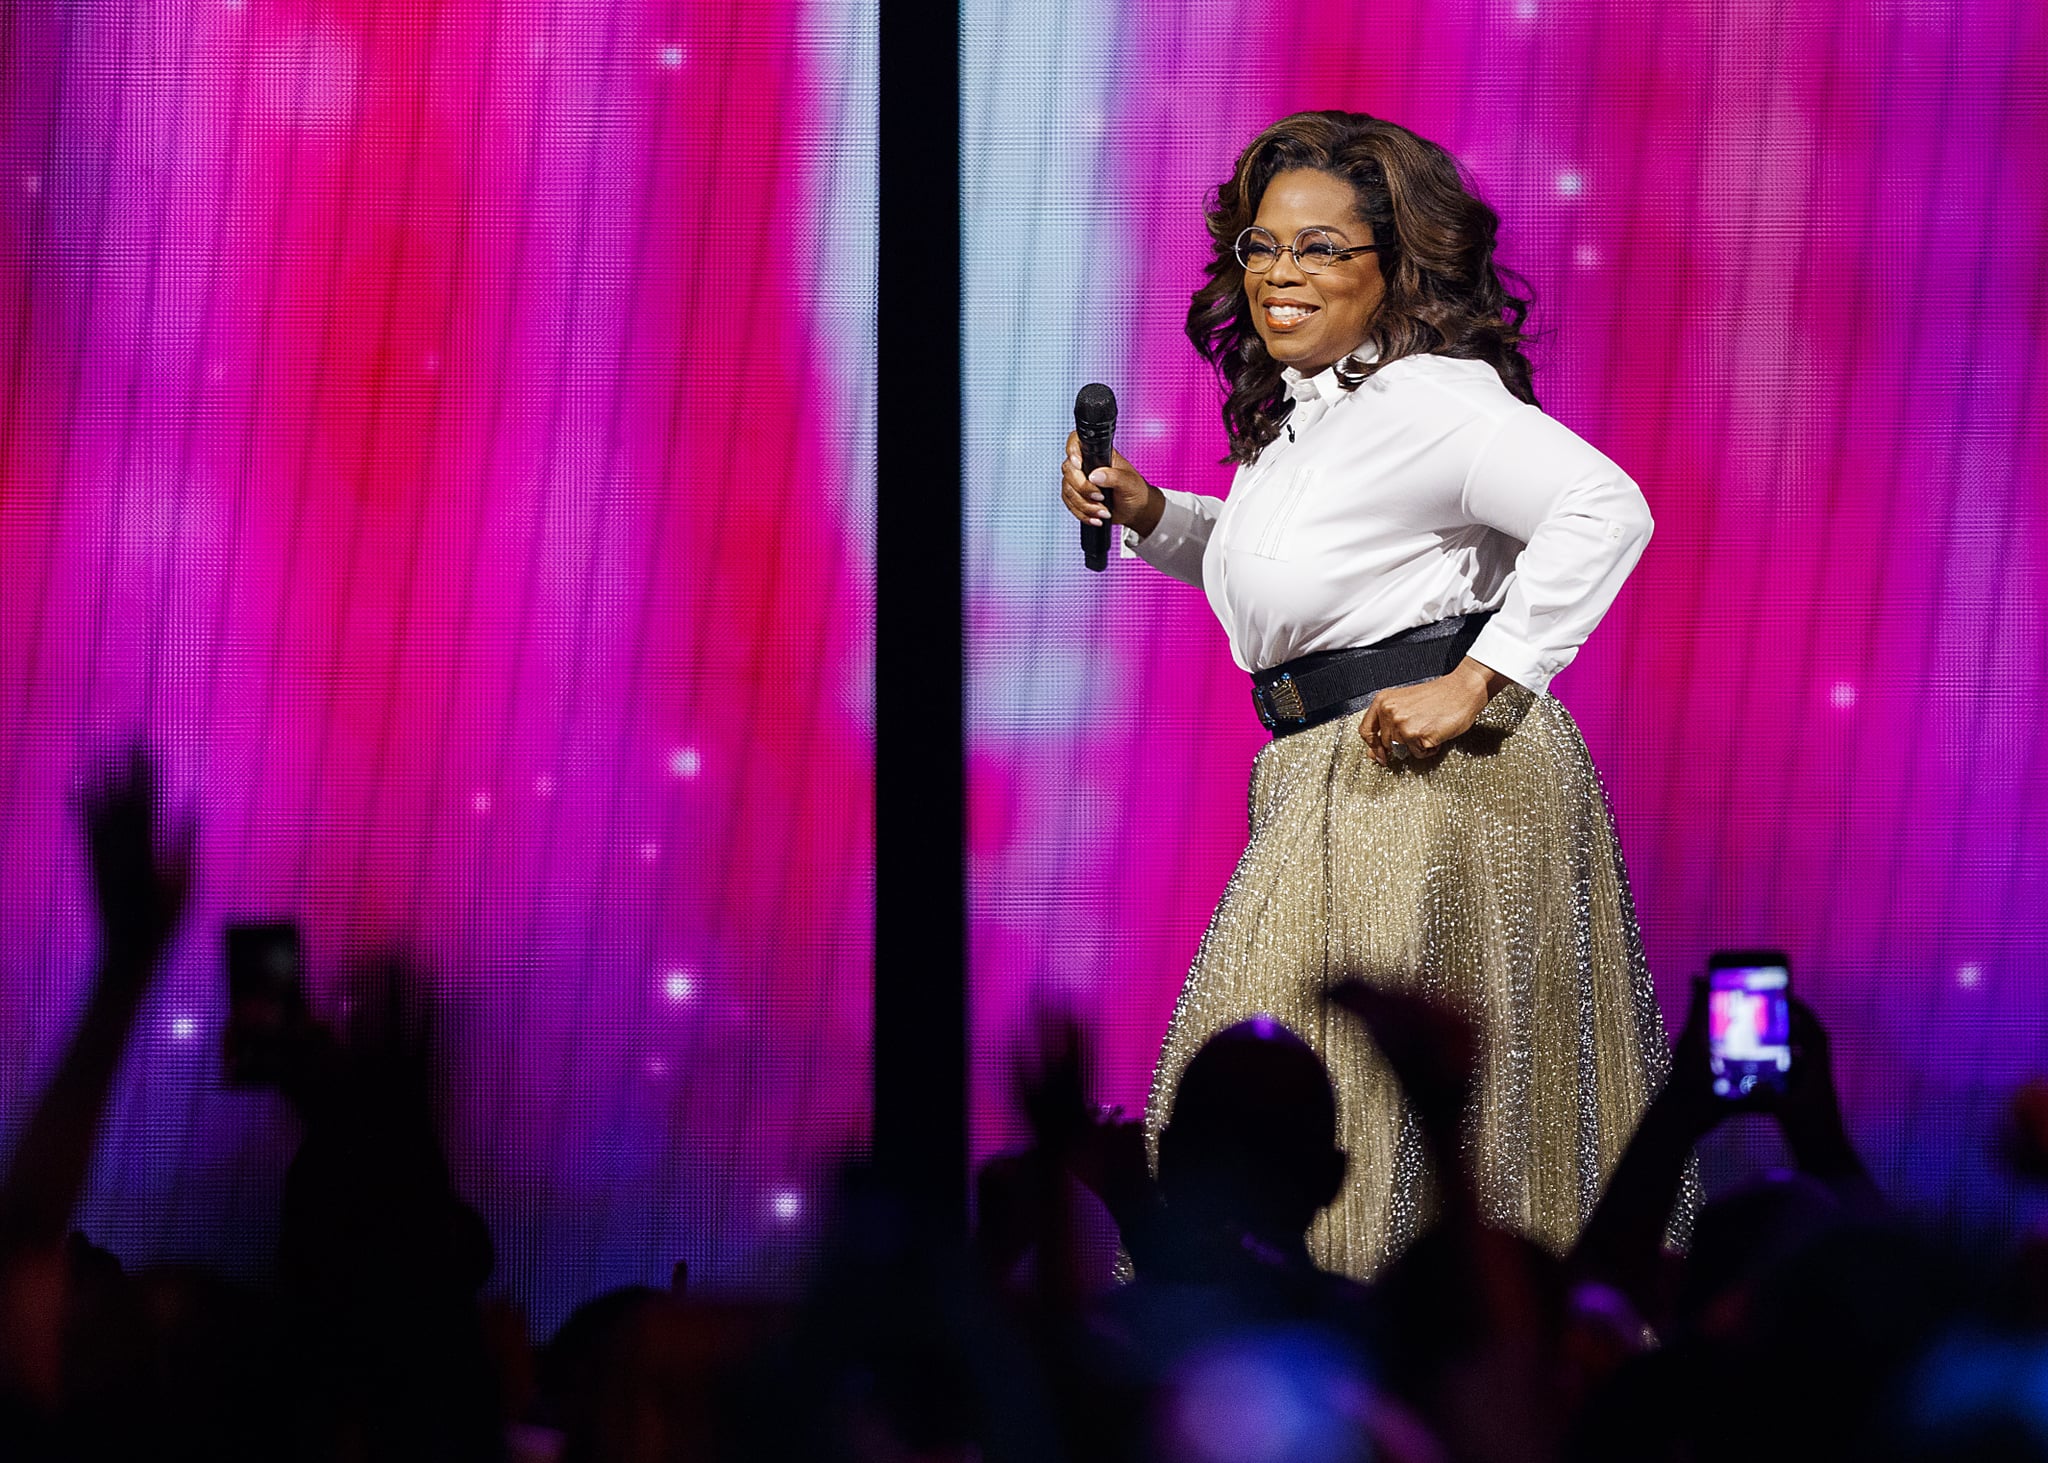 VANCOUVER, BRITISH COLUMBIA - JUNE 24: Oprah Winfrey speaks on stage at Rogers Arena on June 24, 2019 in Vancouver, Canada. (Photo by Andrew Chin/Getty Images)